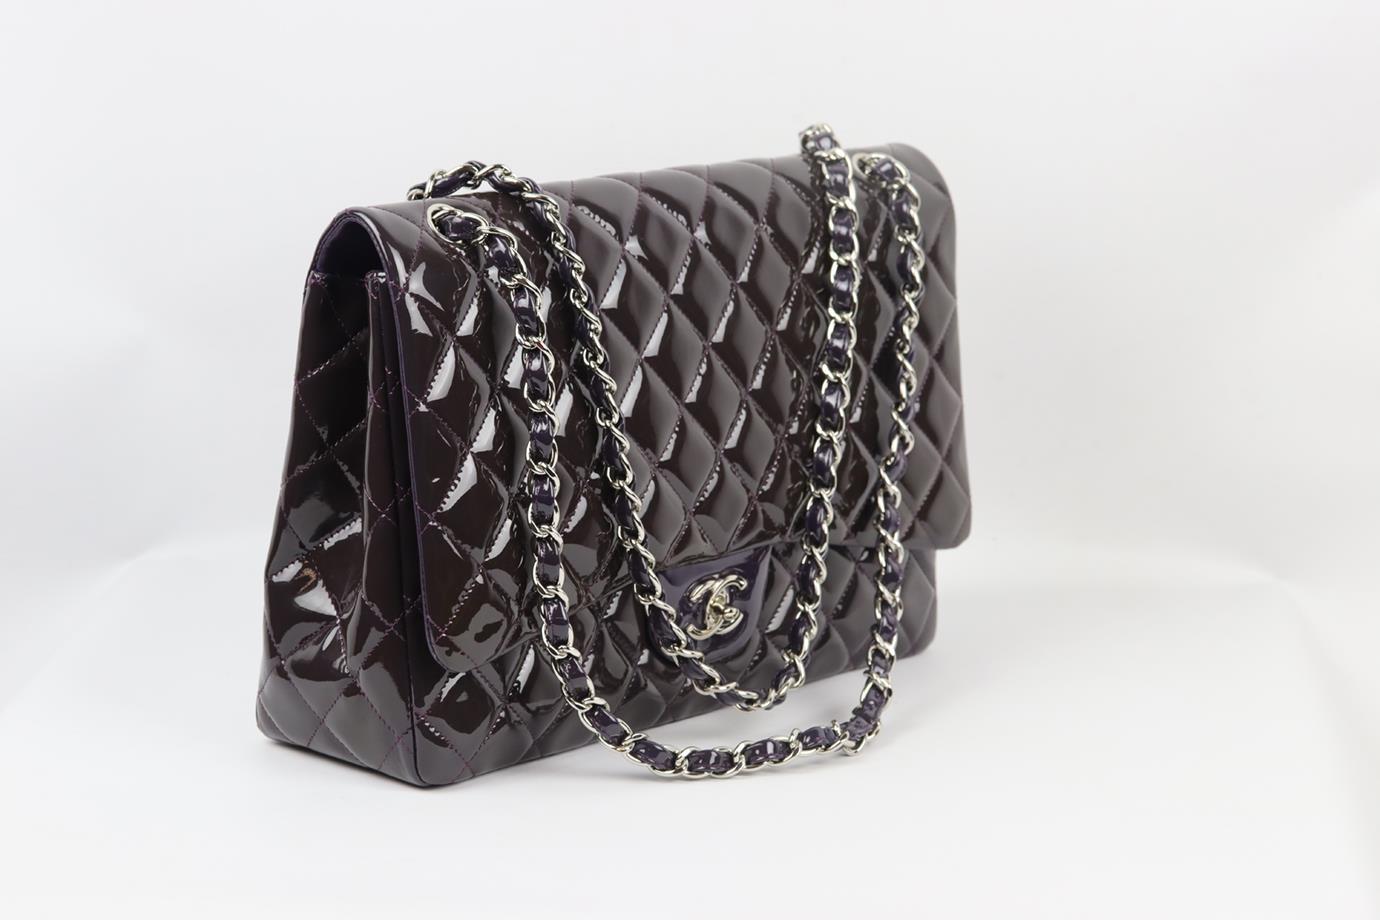 Chanel 2010 Maxi Classic Quilted Patent Leather Single Flap Shoulder Bag For Sale 3